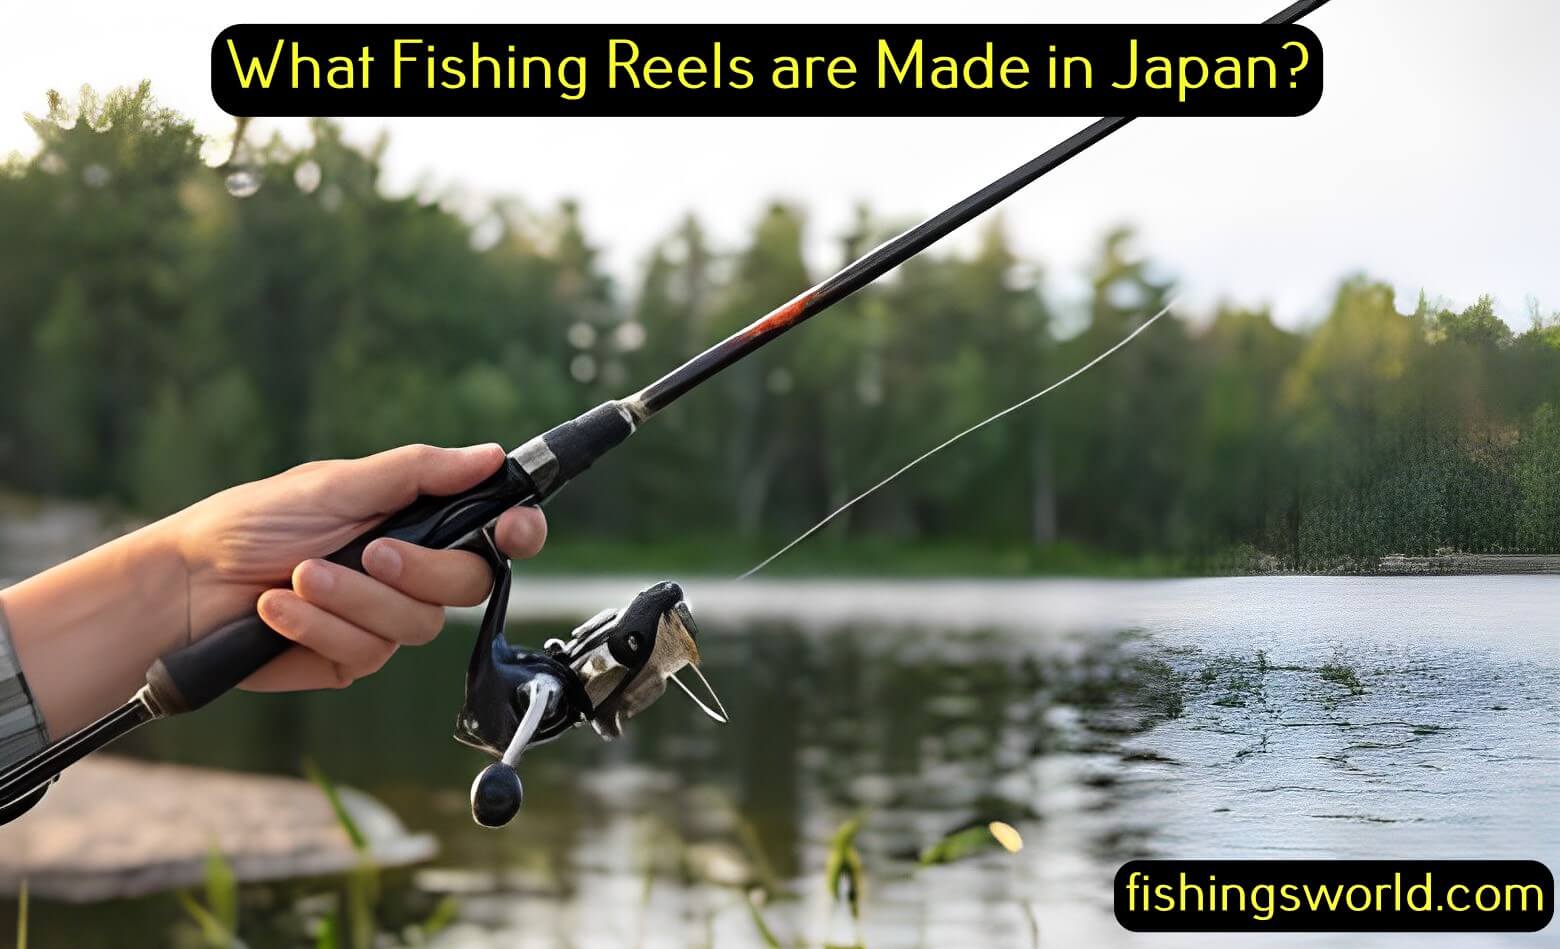 What Fishing Reels are Made in Japan